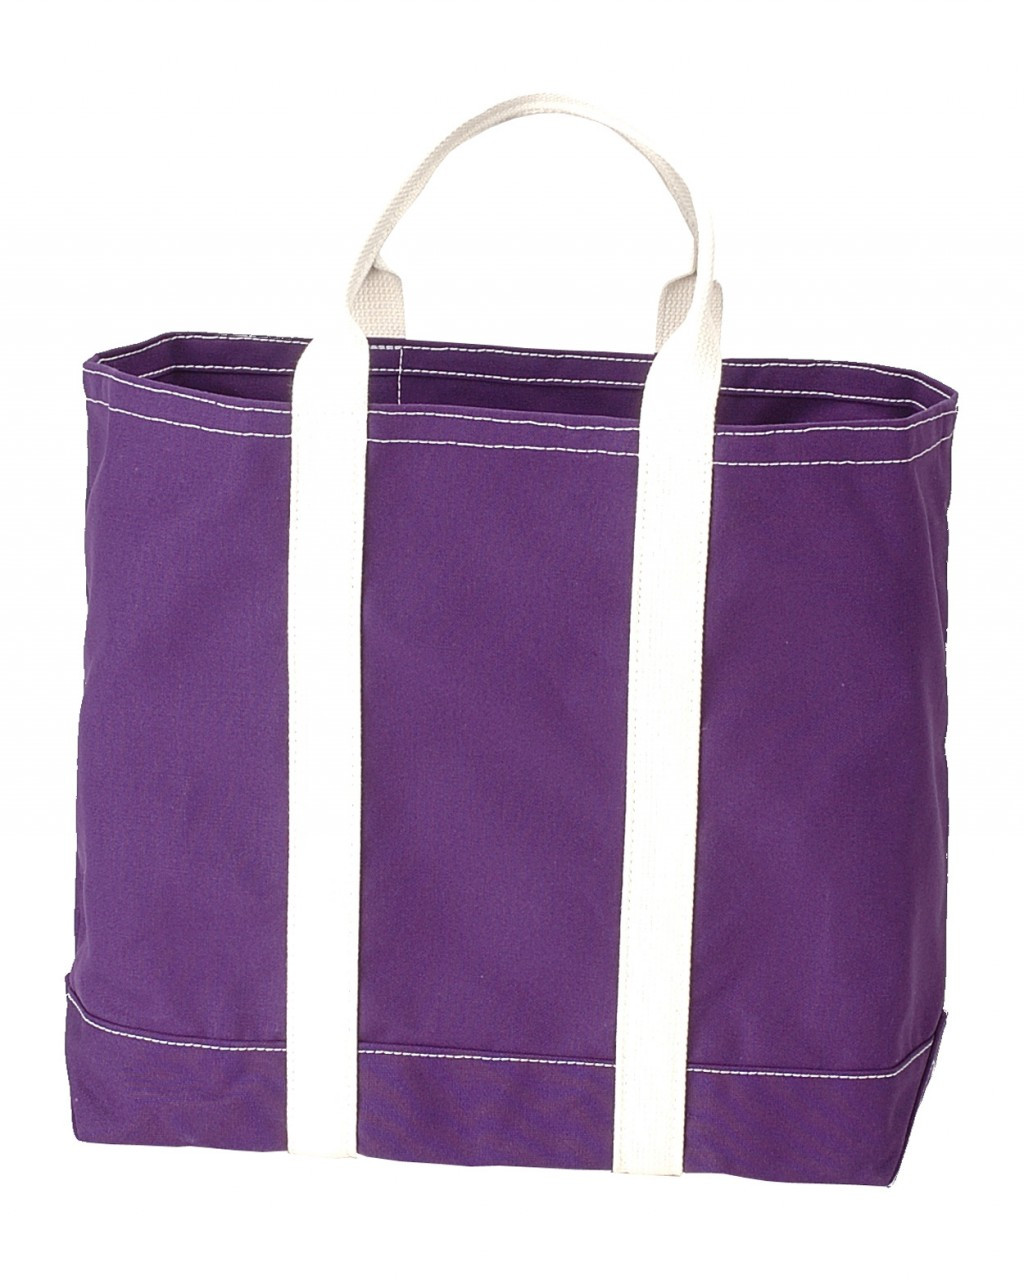 Land's End extra large canvas tote purple with monogram 26 wide light  stains